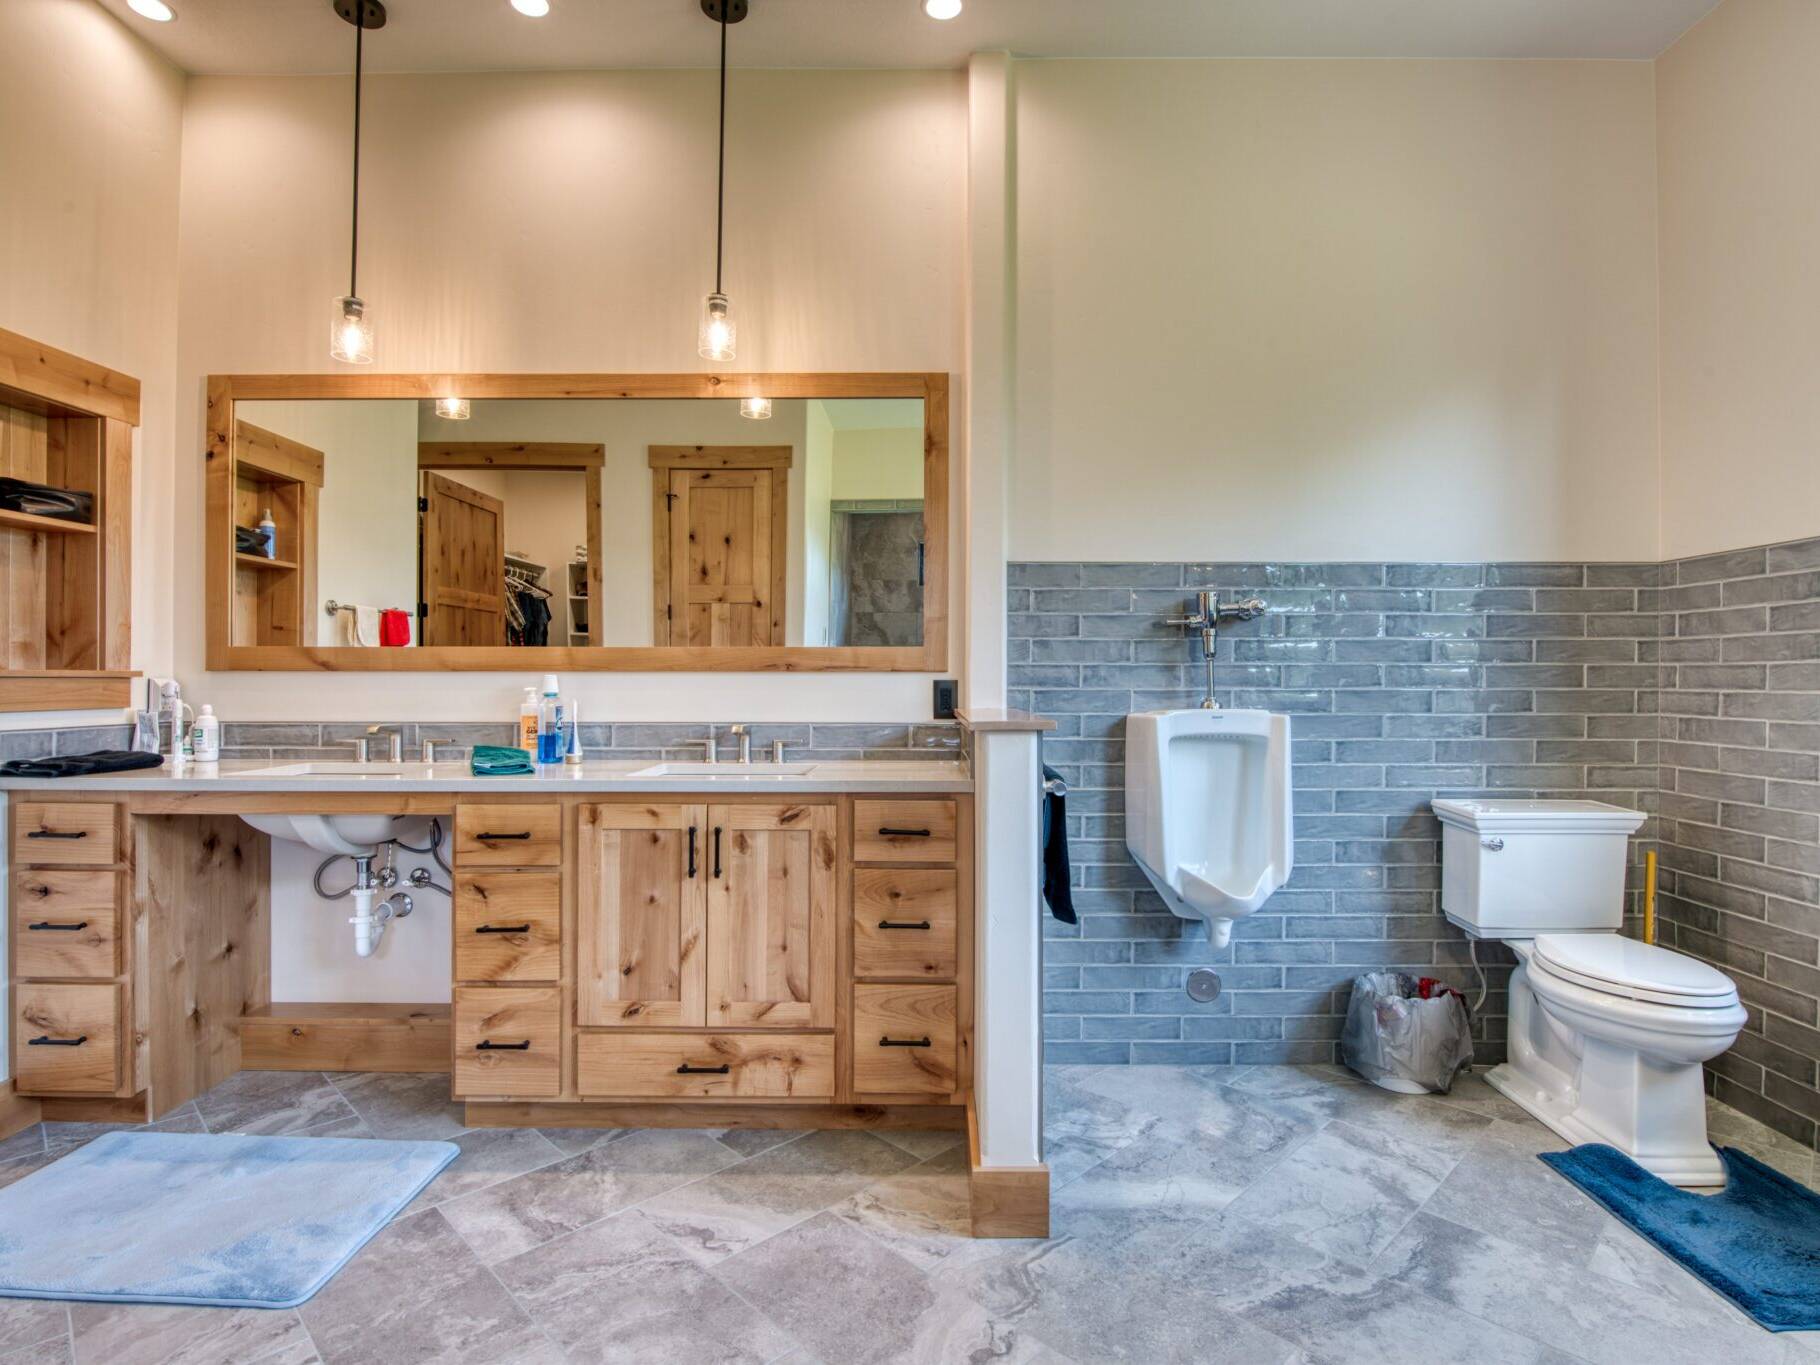 Master bathroom with rustic alder cabinets, quartz countertops, tile floor and wainscotting, and urinal in a custom home built by Big Sky Builders in Florence, MT